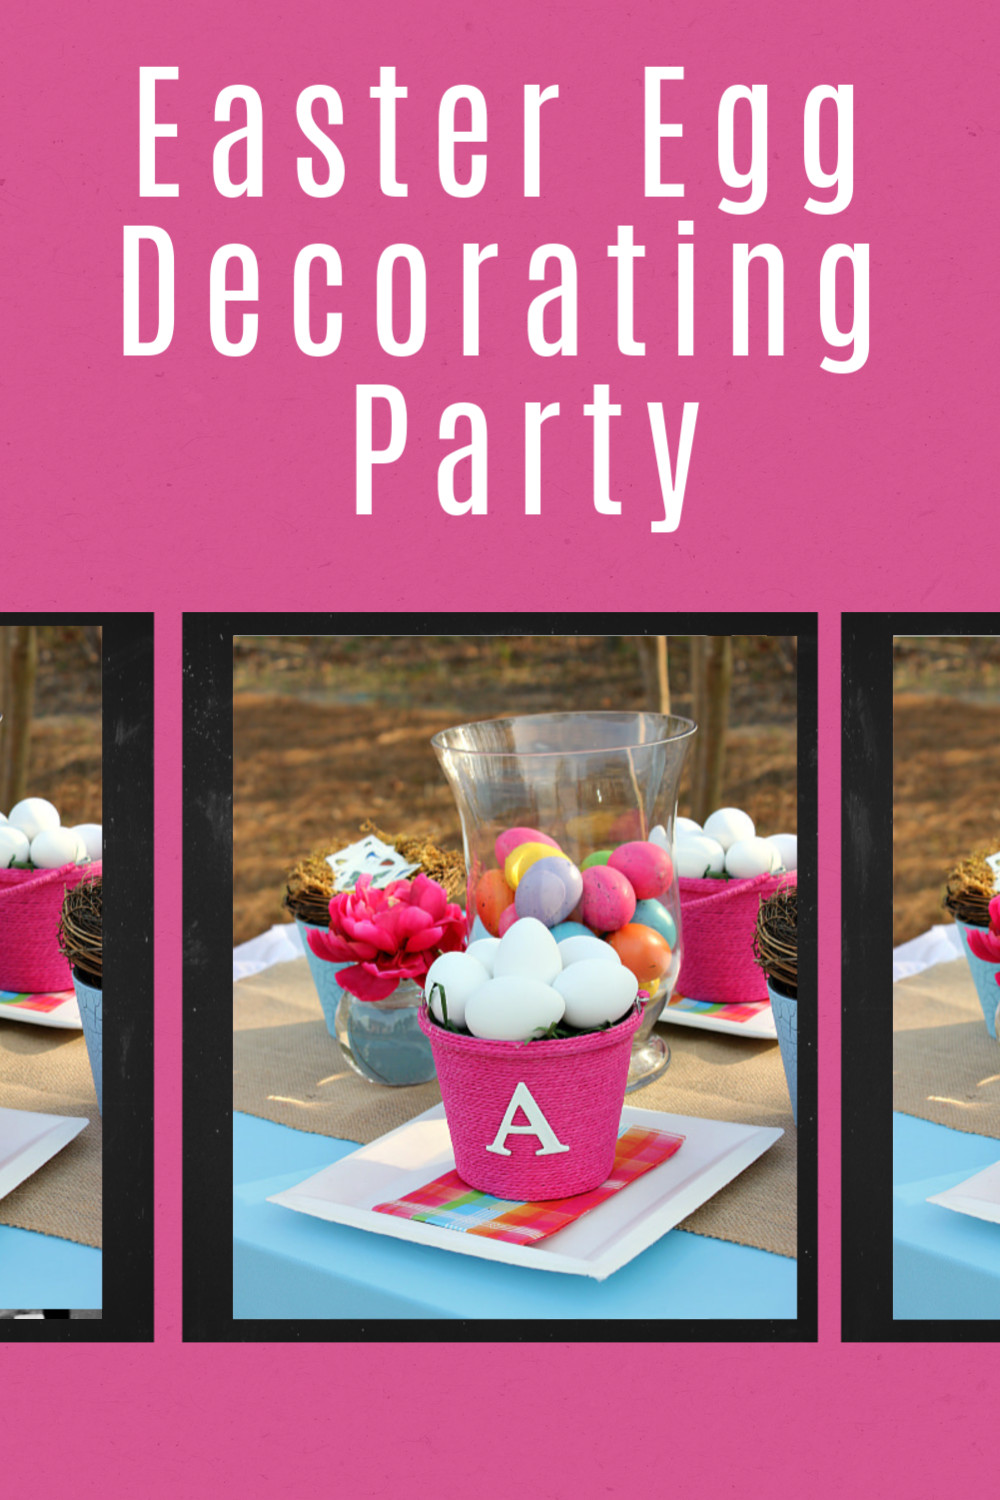 Easter Party Planning Ideas
 Host an Easter Egg Decorating Party So many cute ideas